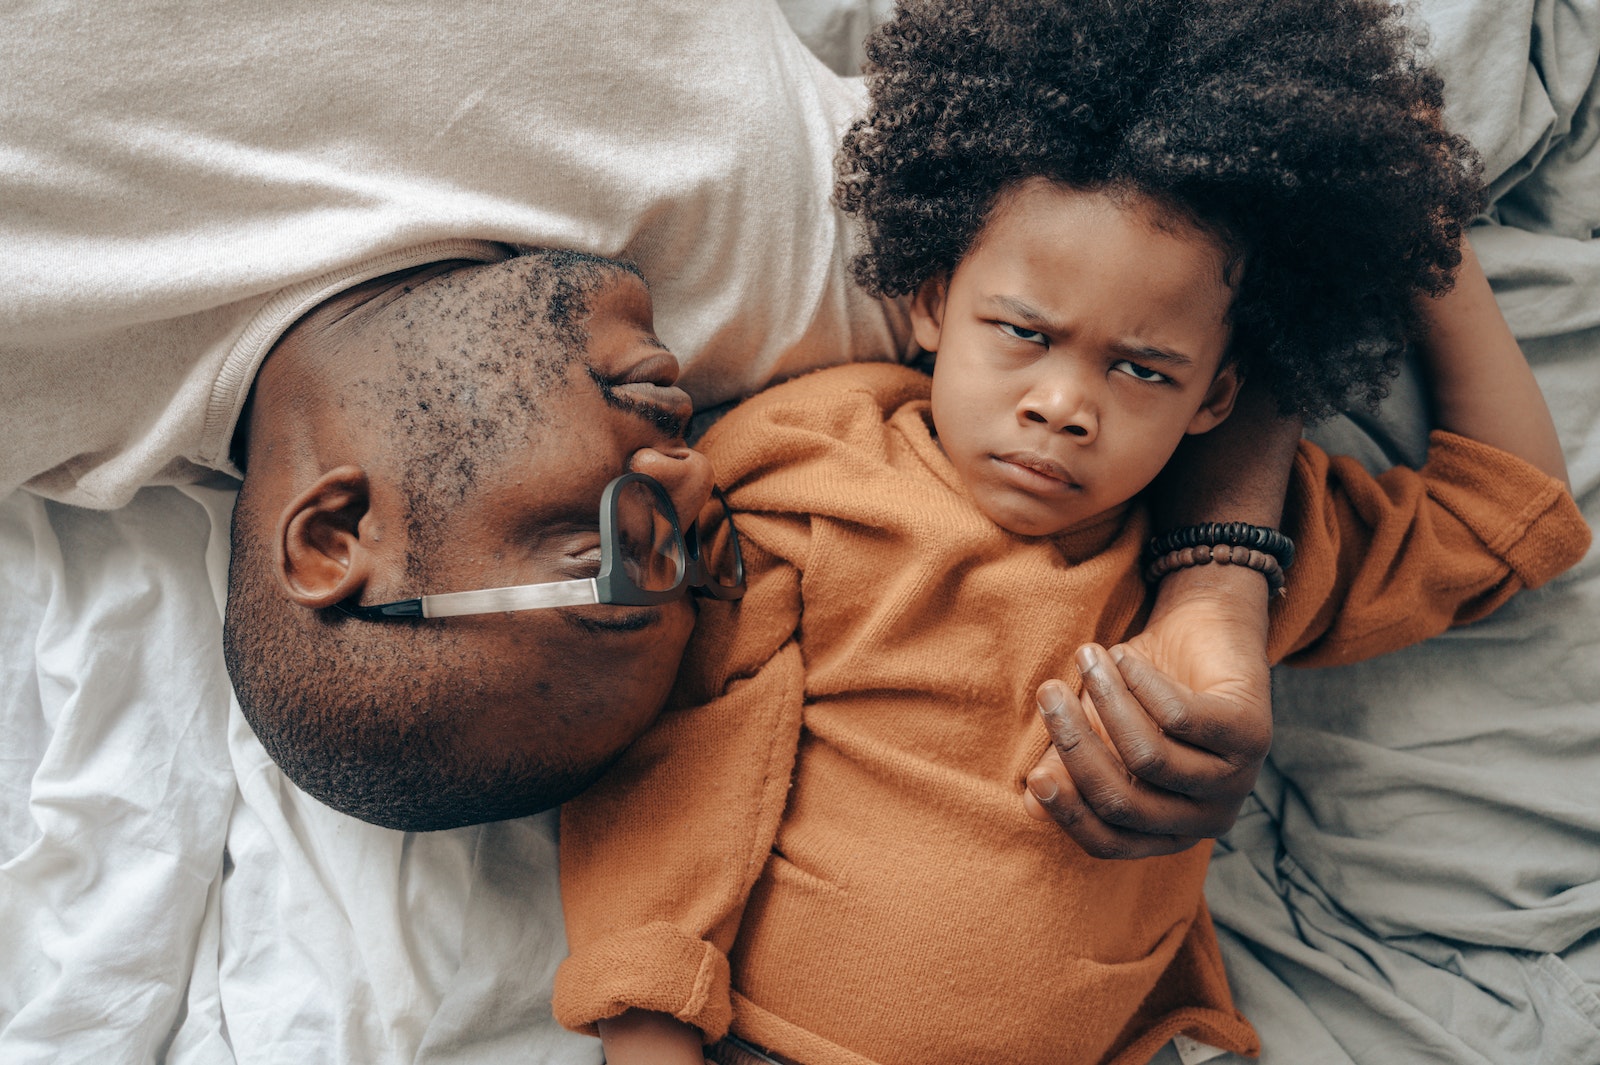 African American man lying near angry child